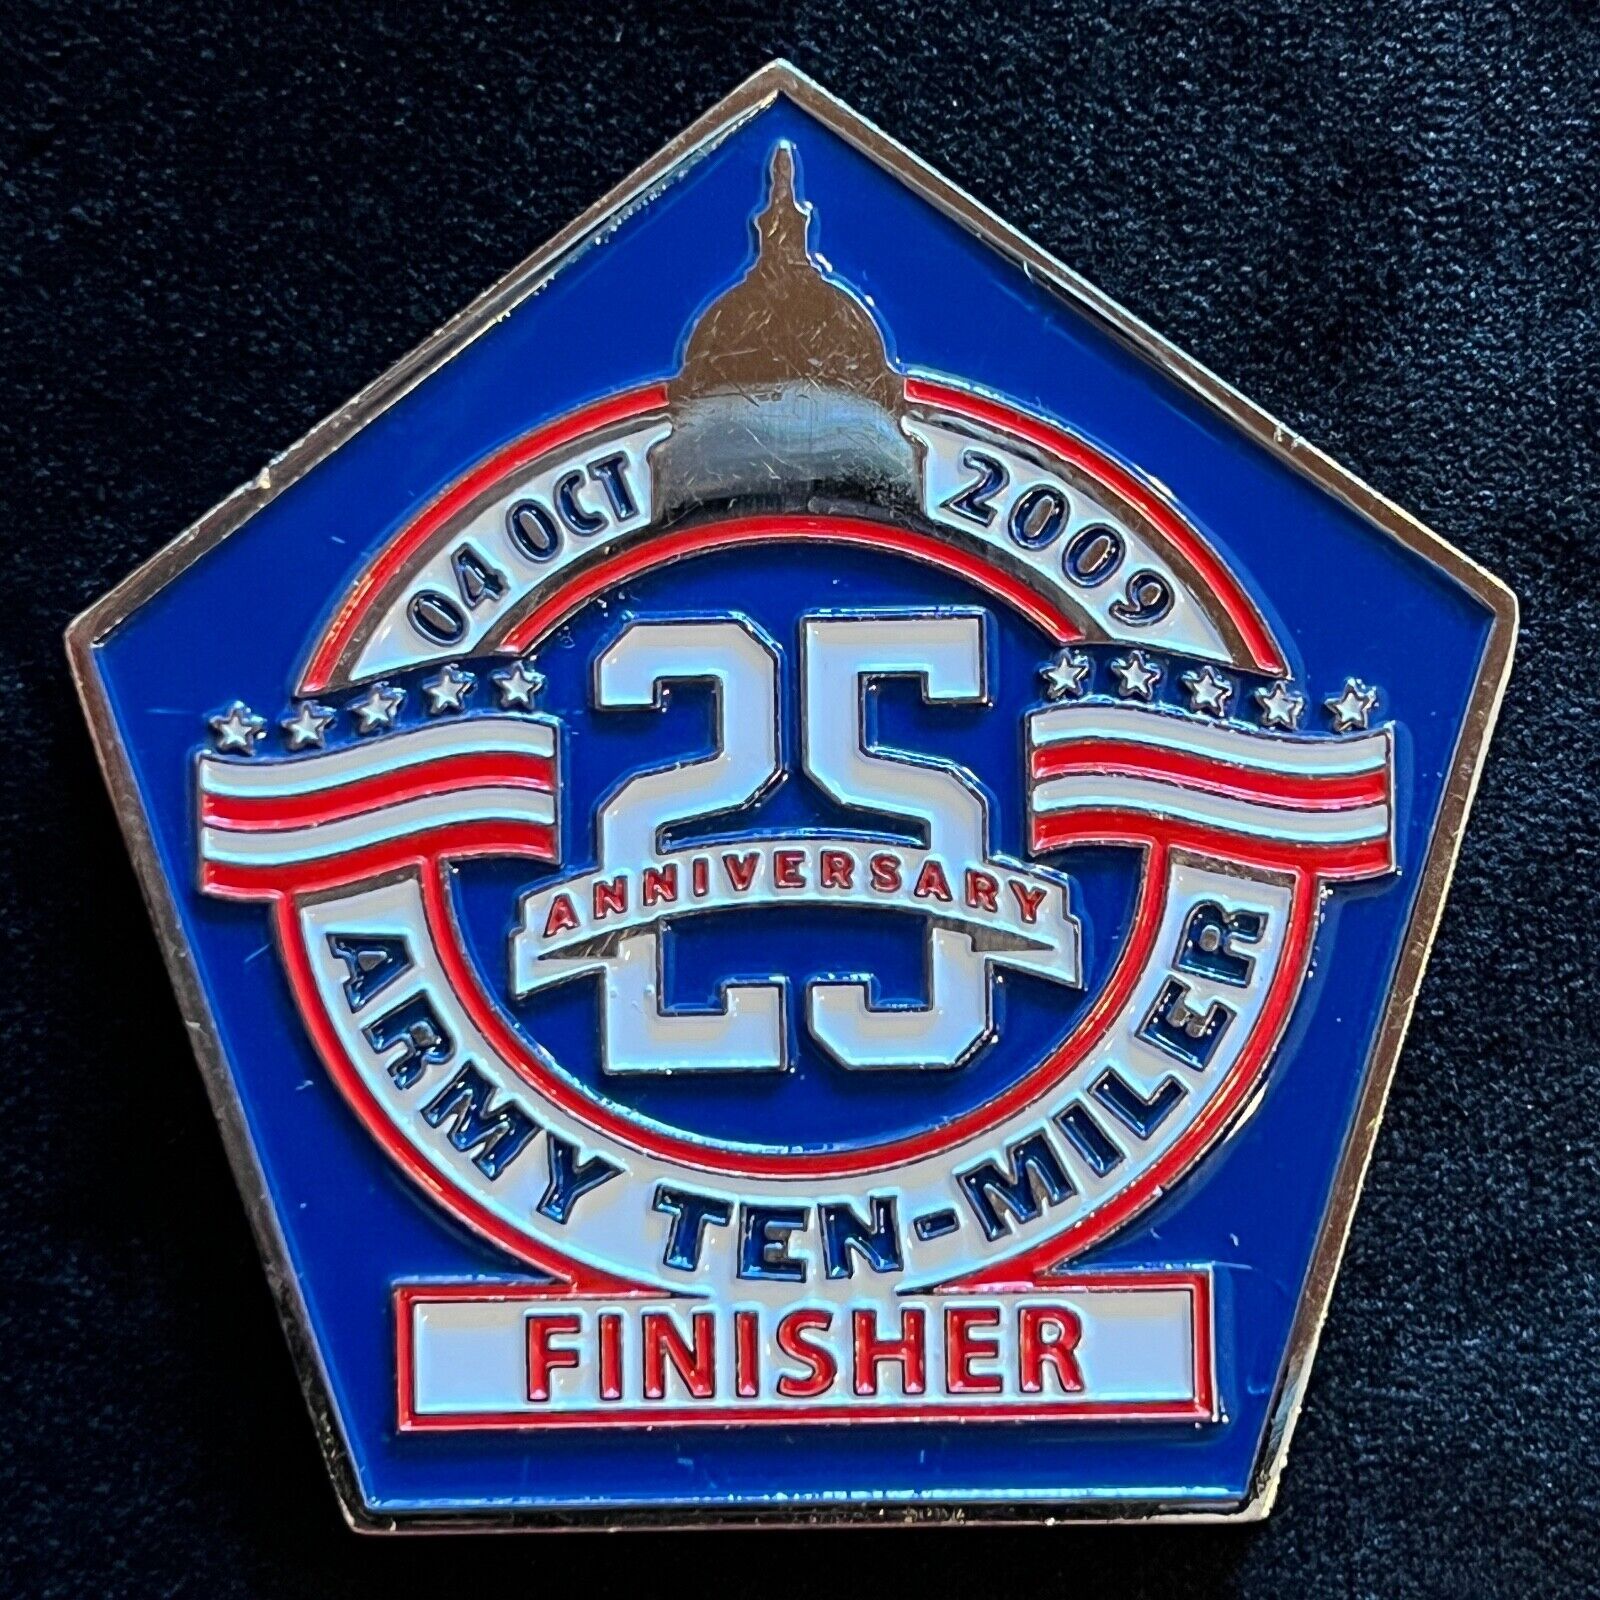 Army Ten Miler 2009 Finisher Challenge Coin